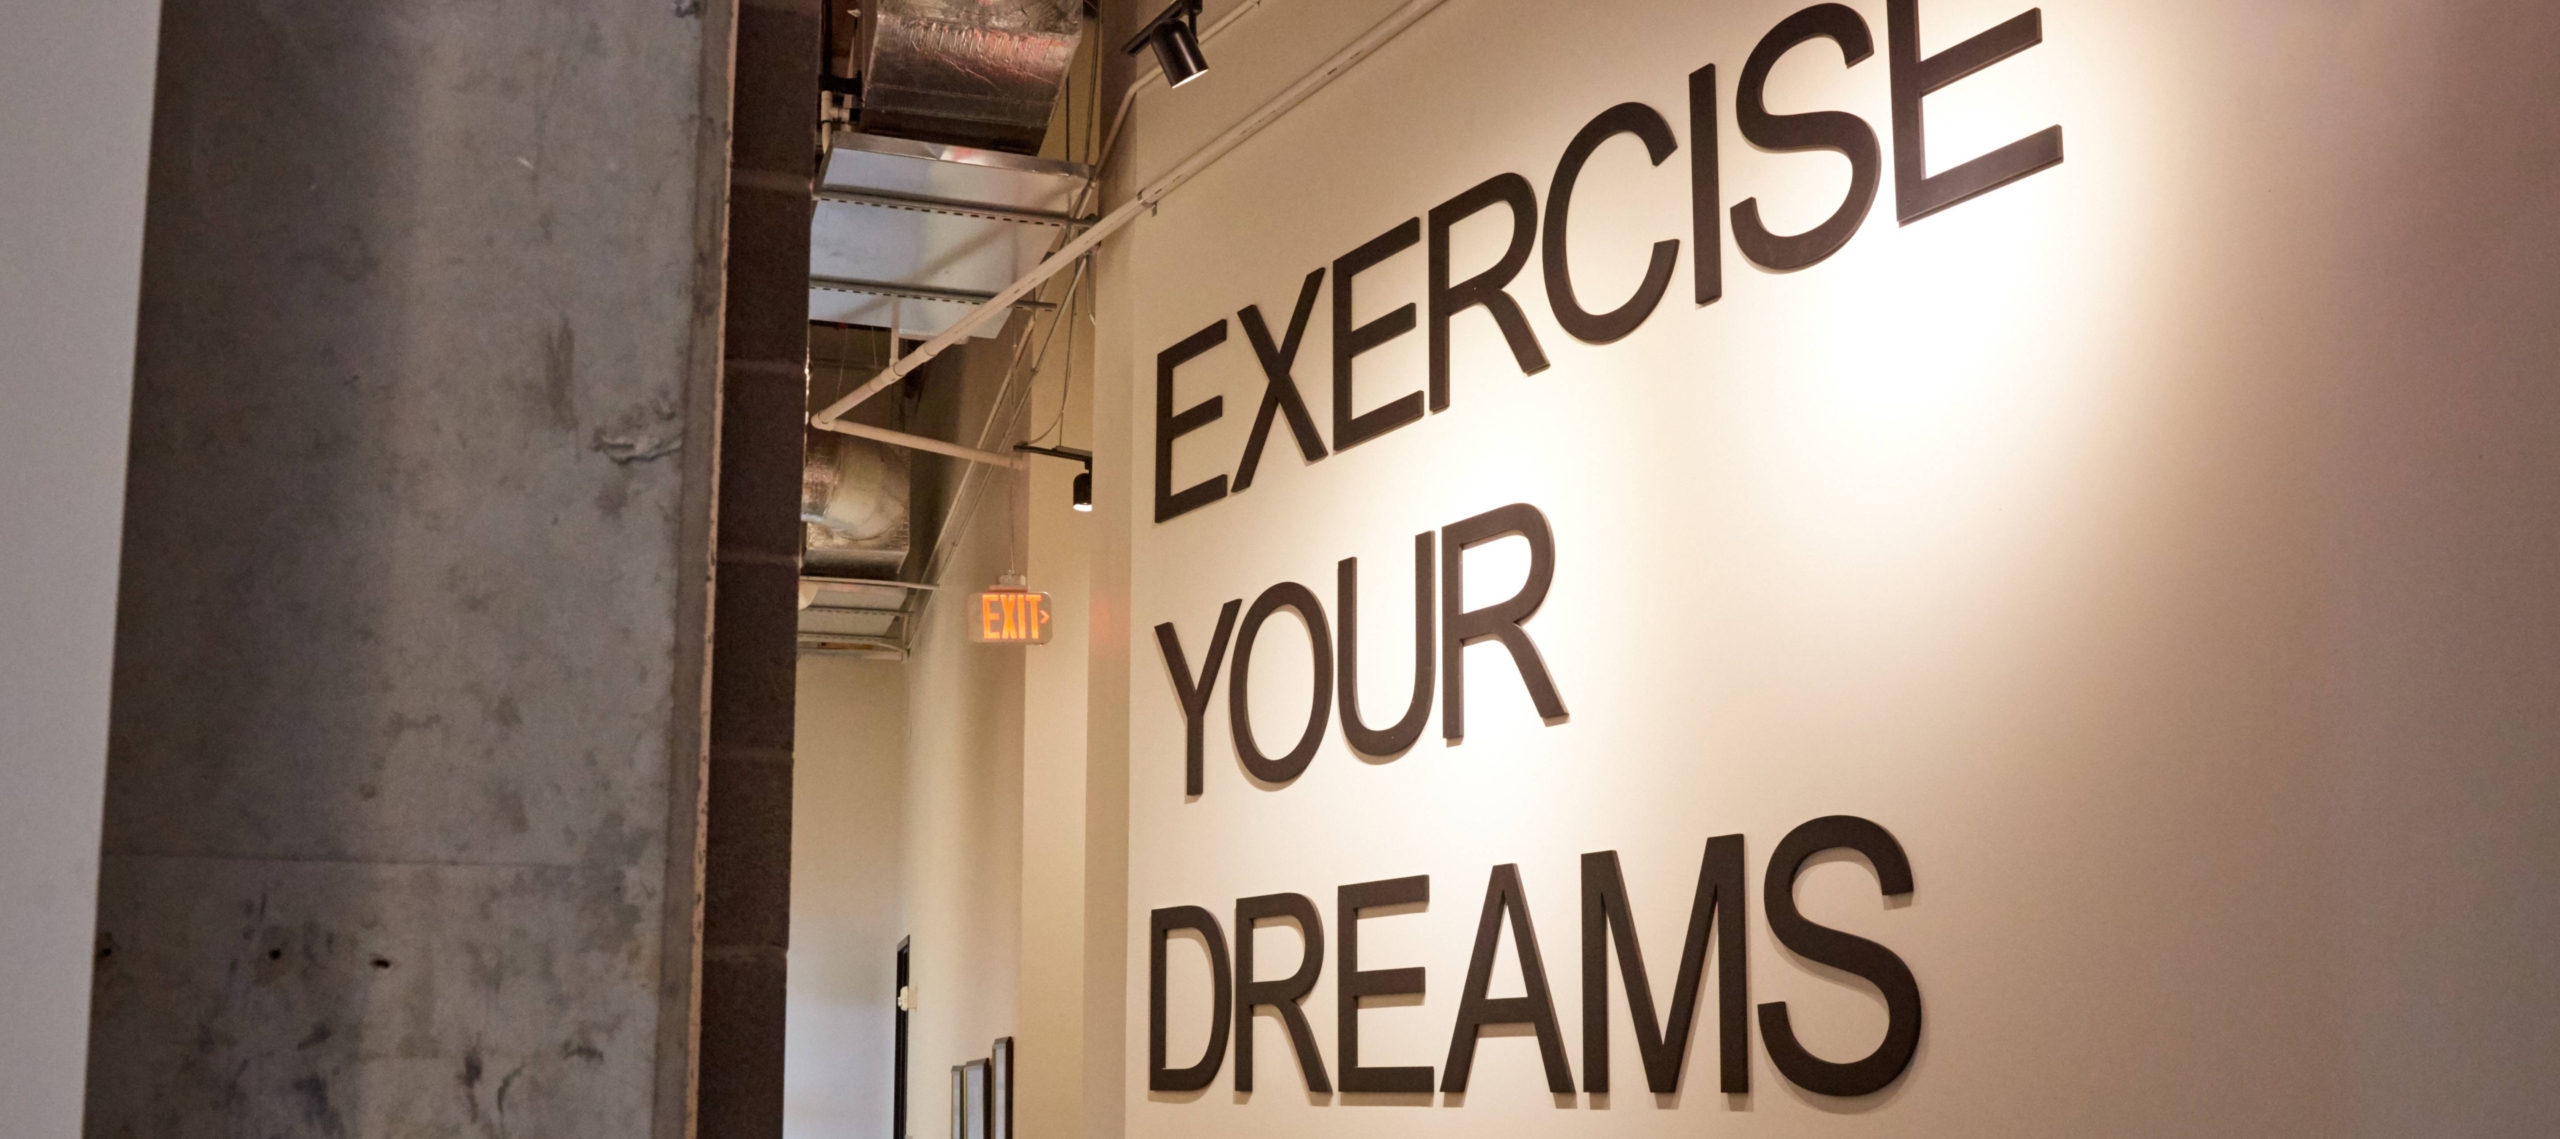 Exercise Your Dreams wall art